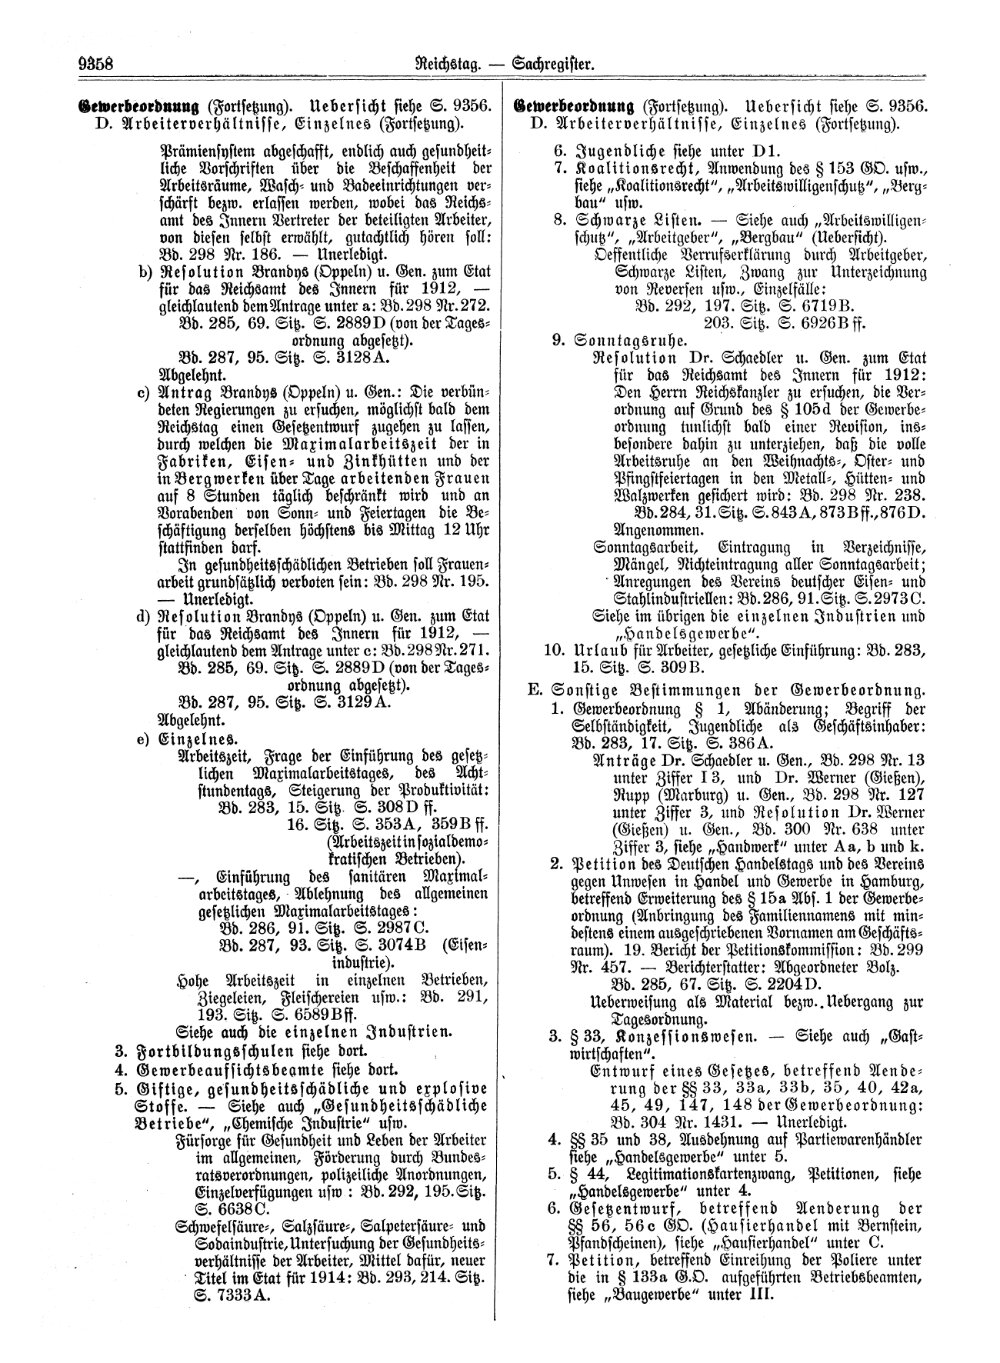 Scan of page 9358